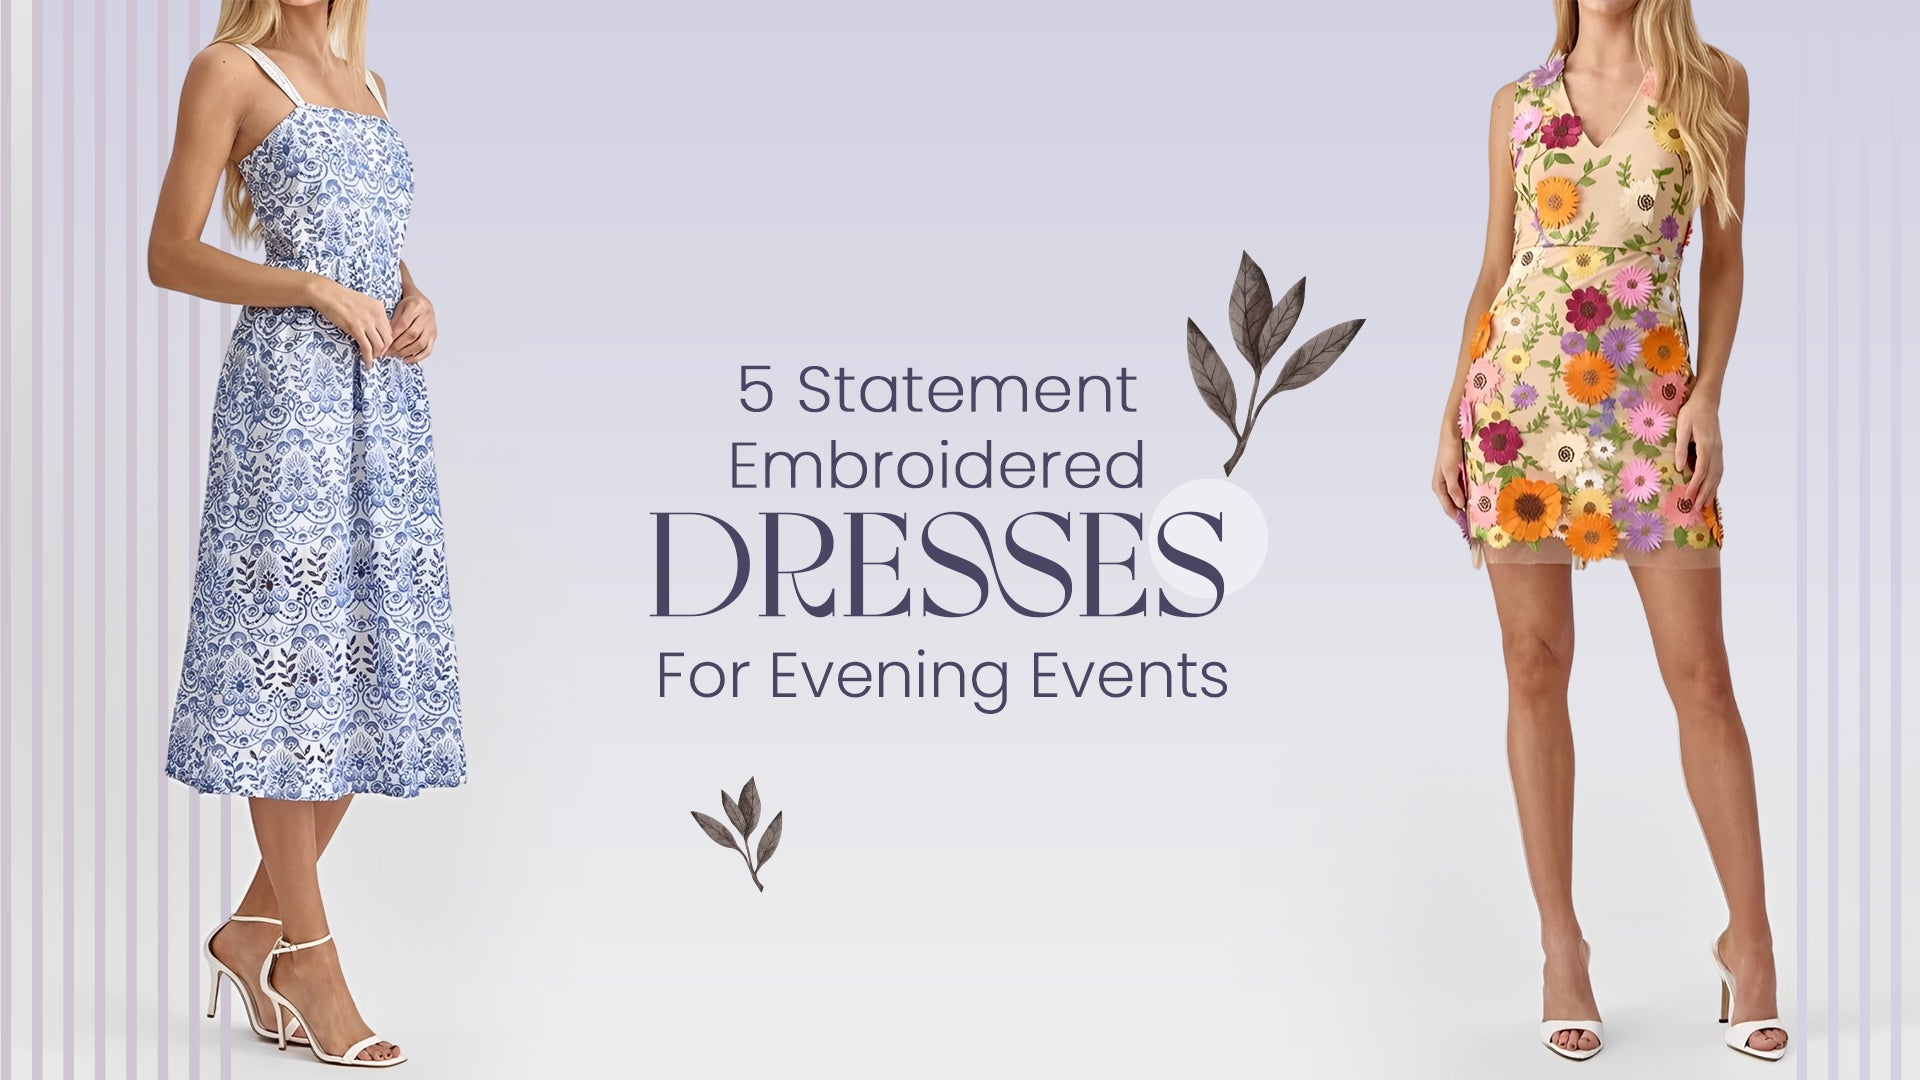 5 Statement Embroidered Dresses for Evening Events